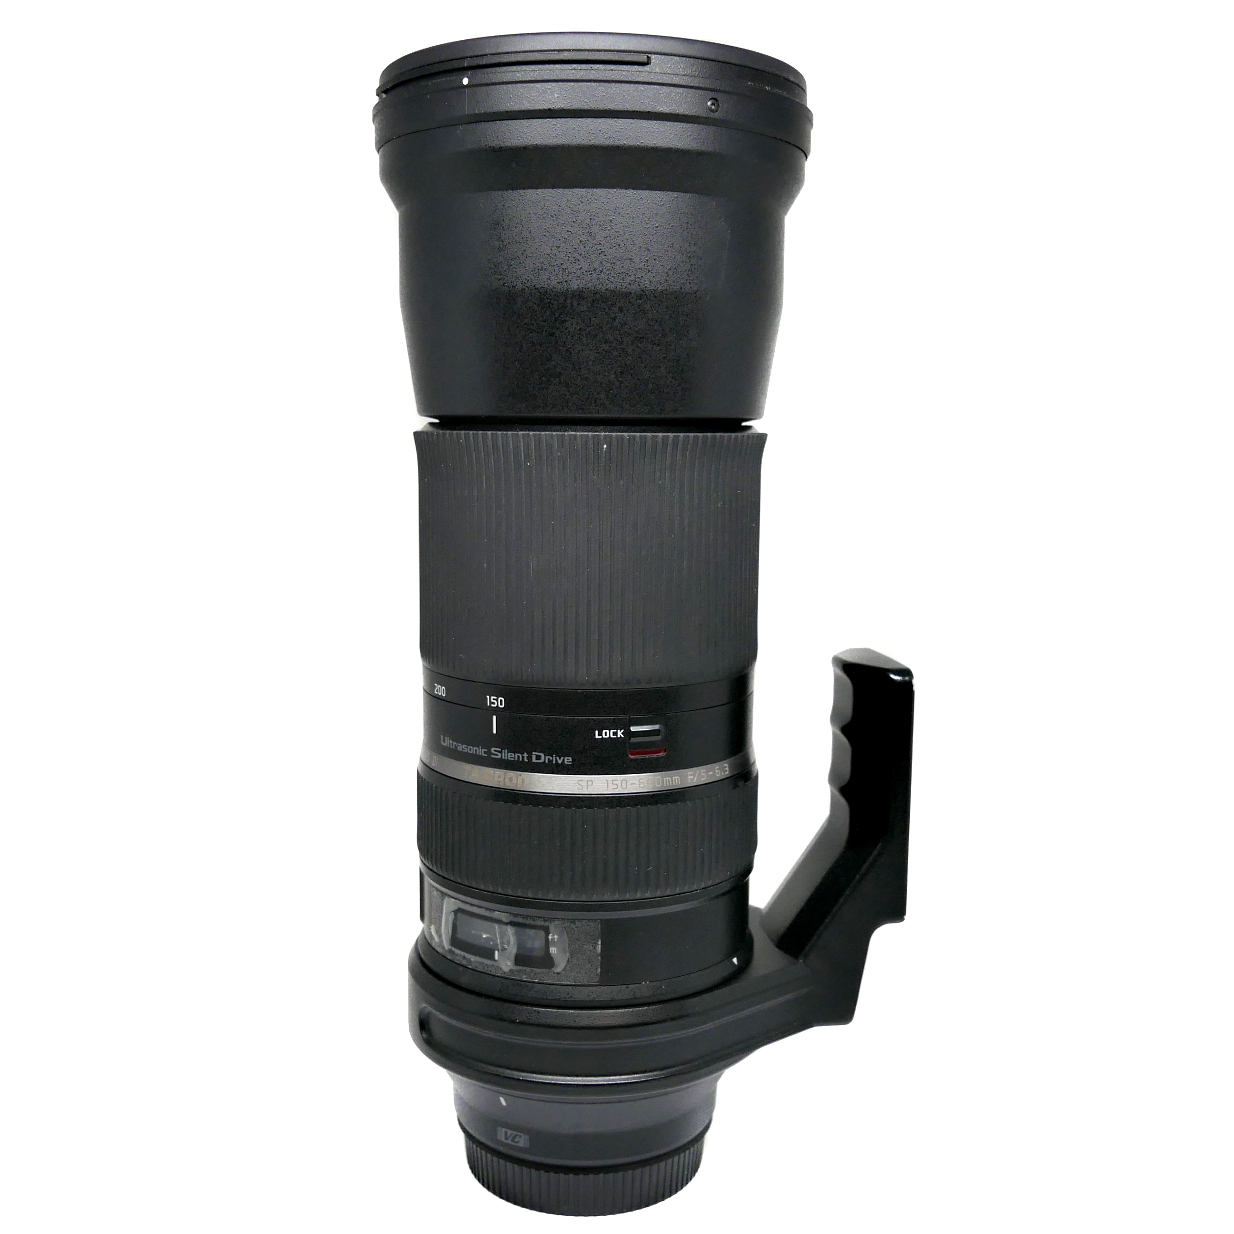 (Myyty) Tamron SP 150-600mm f/5-6.3 Di VC USD (Canon) (käytetty) 